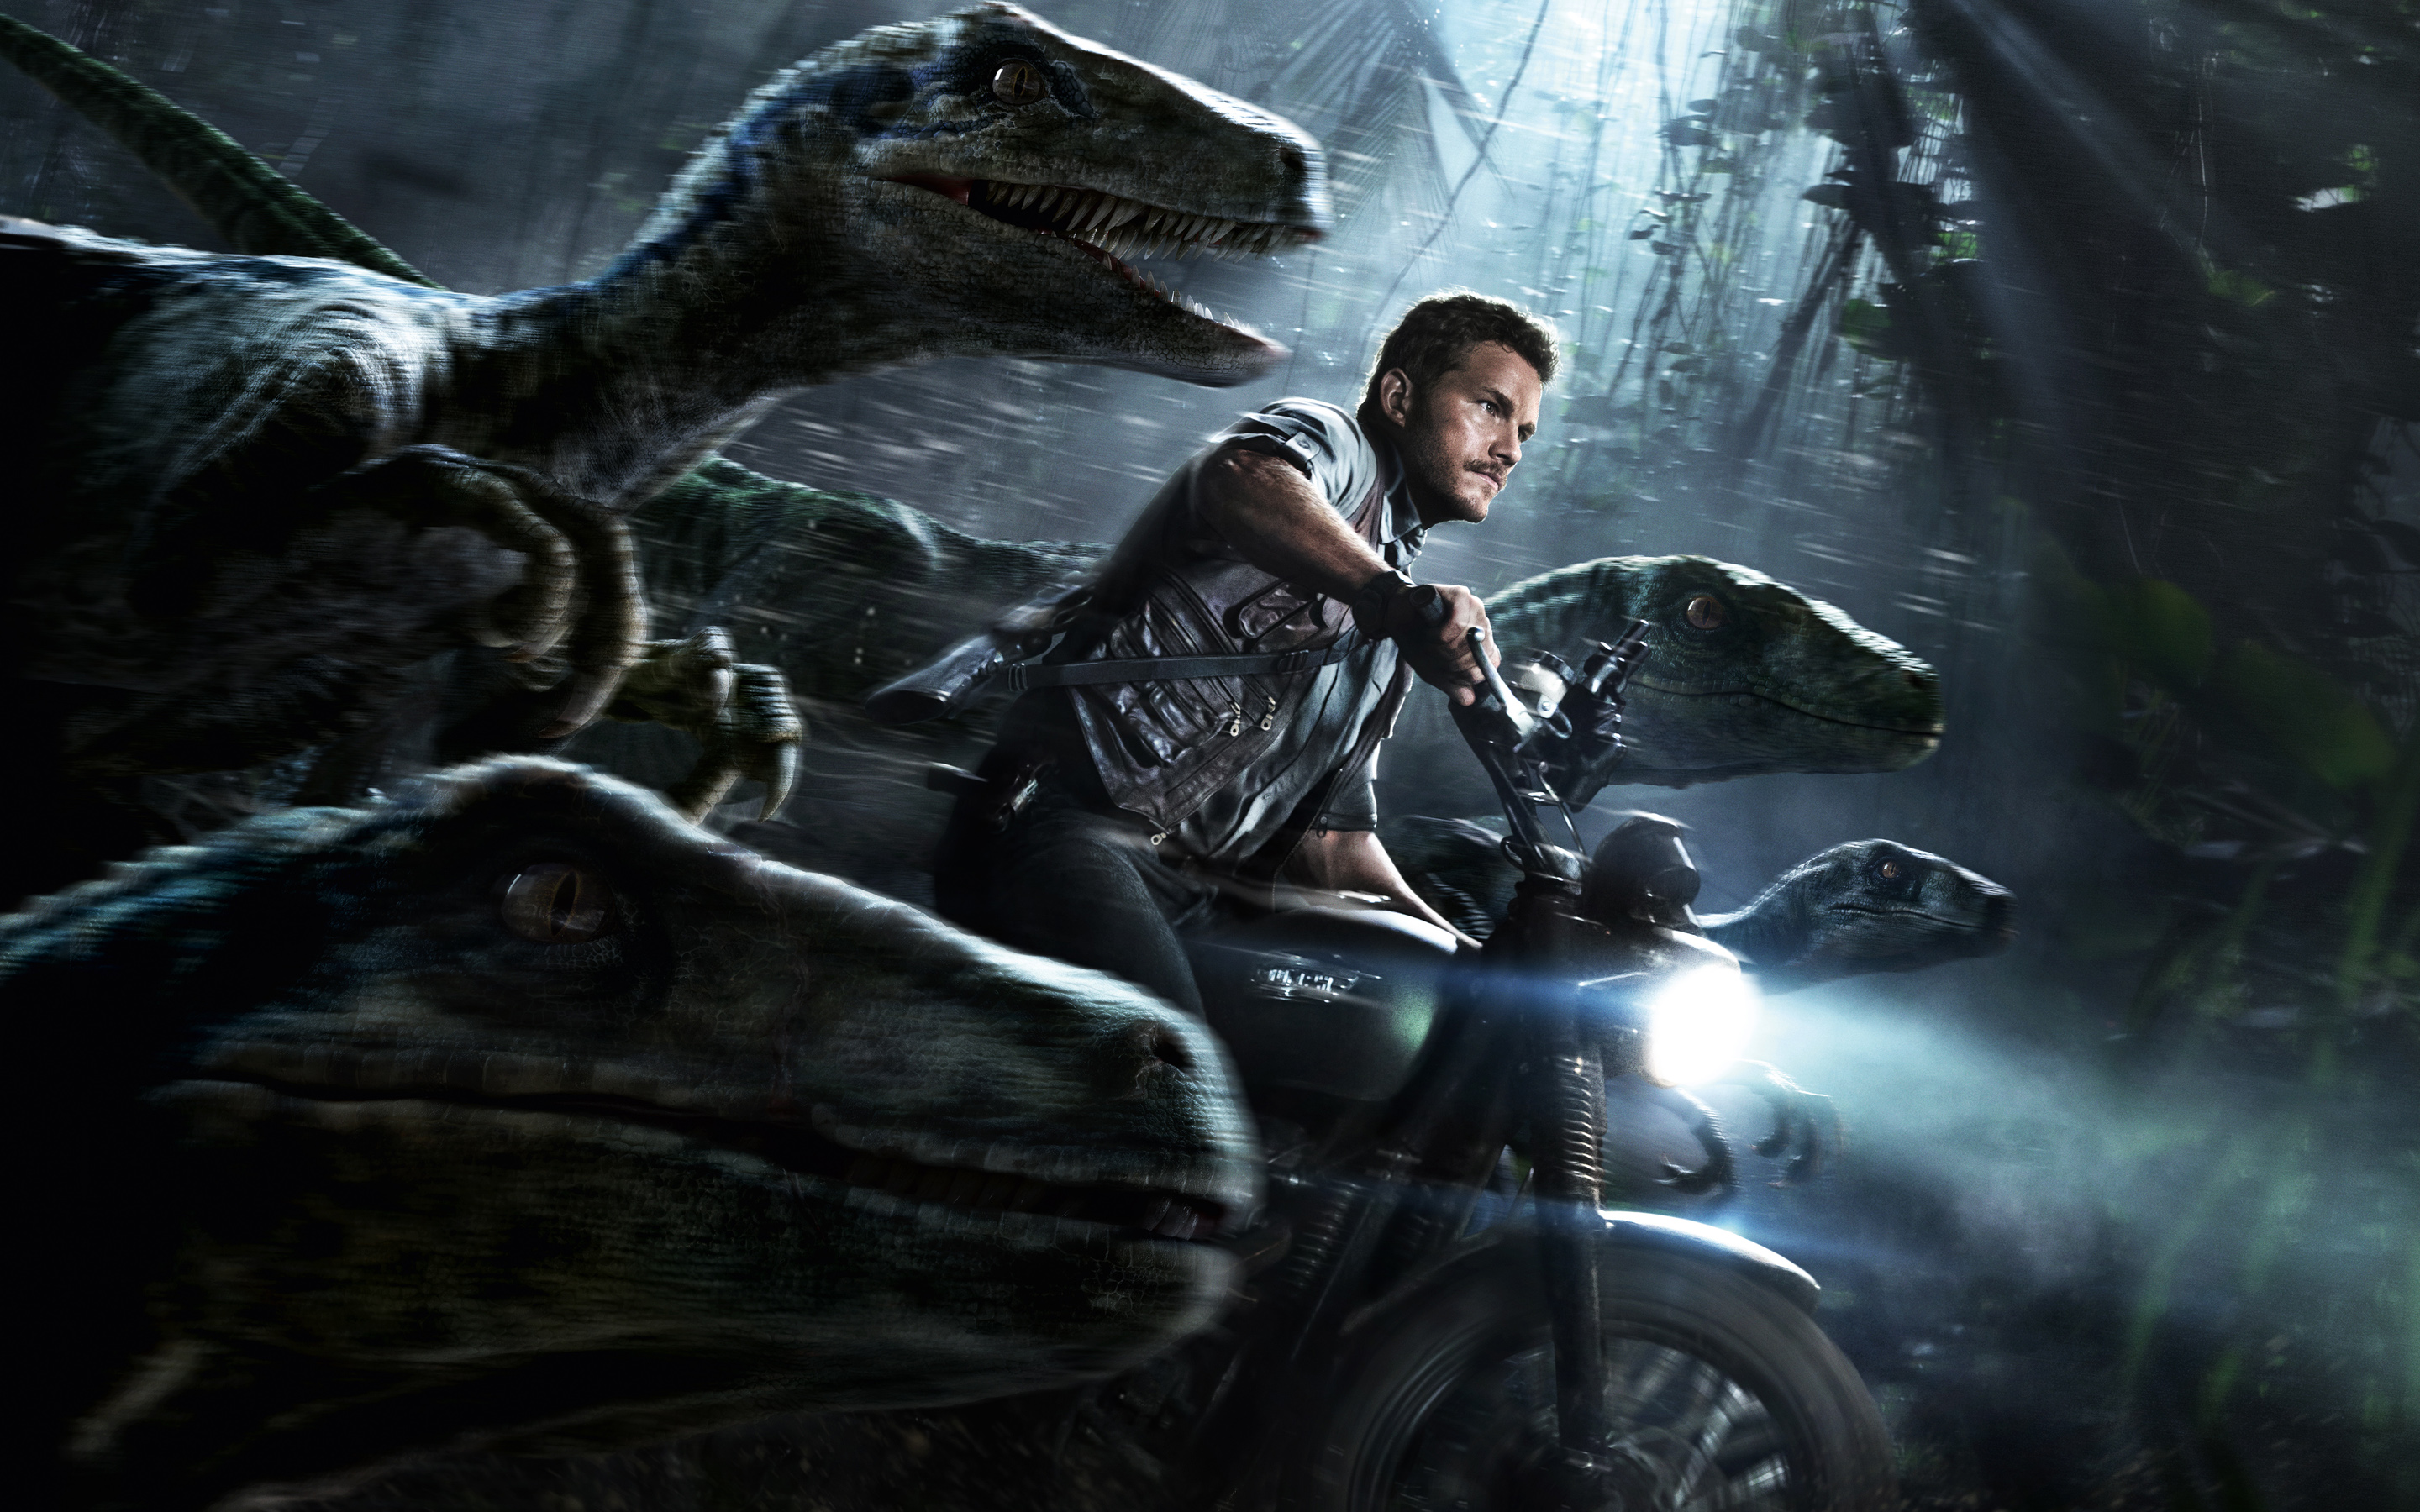 Jurassic World Sequel is Large and Debatable